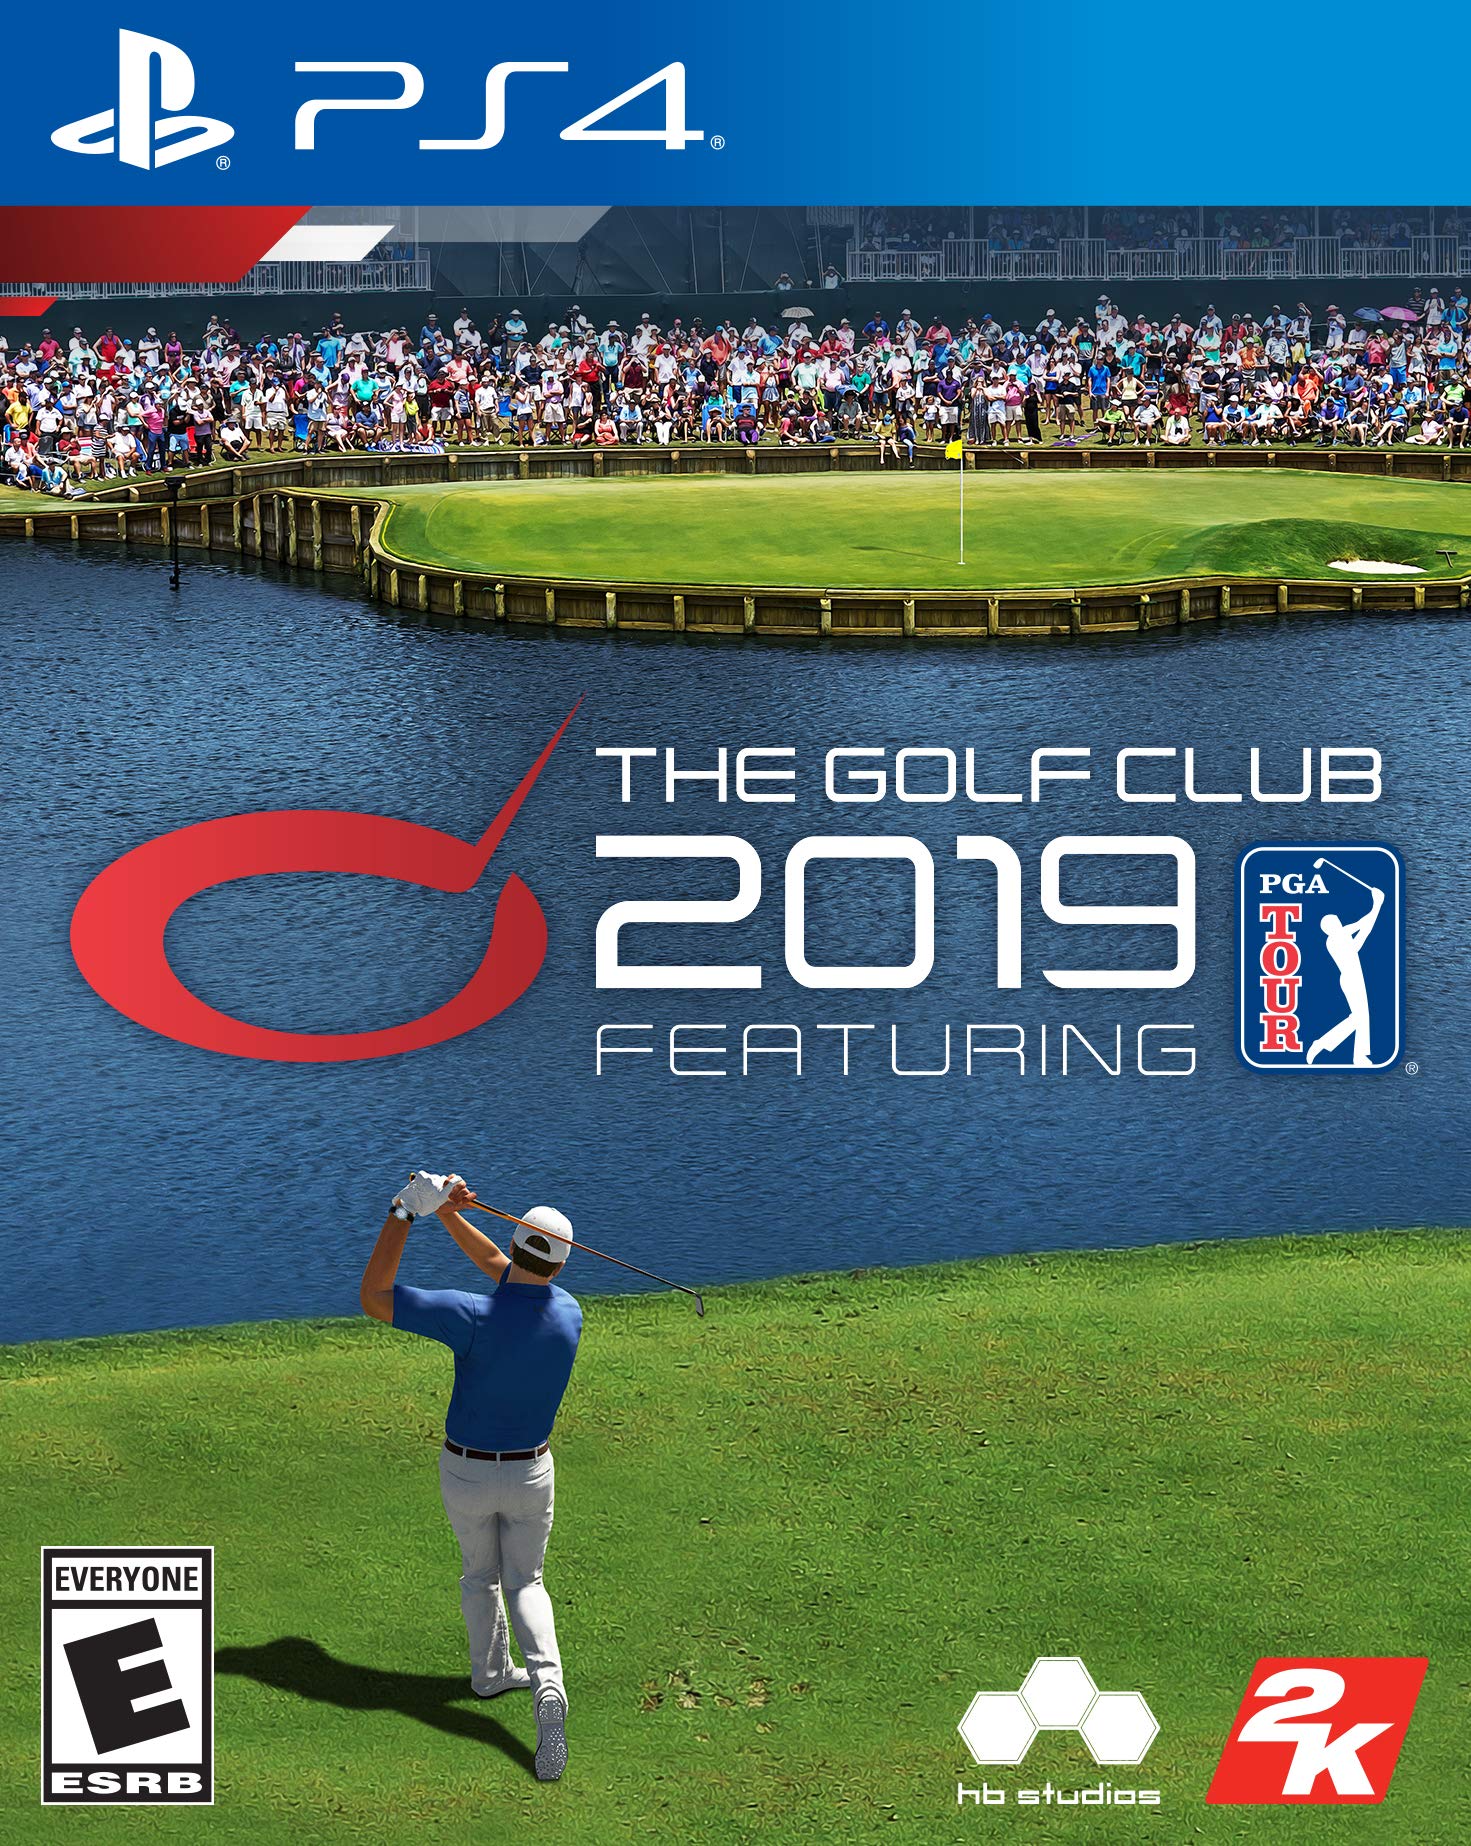 pga tour golf game ps4 release date